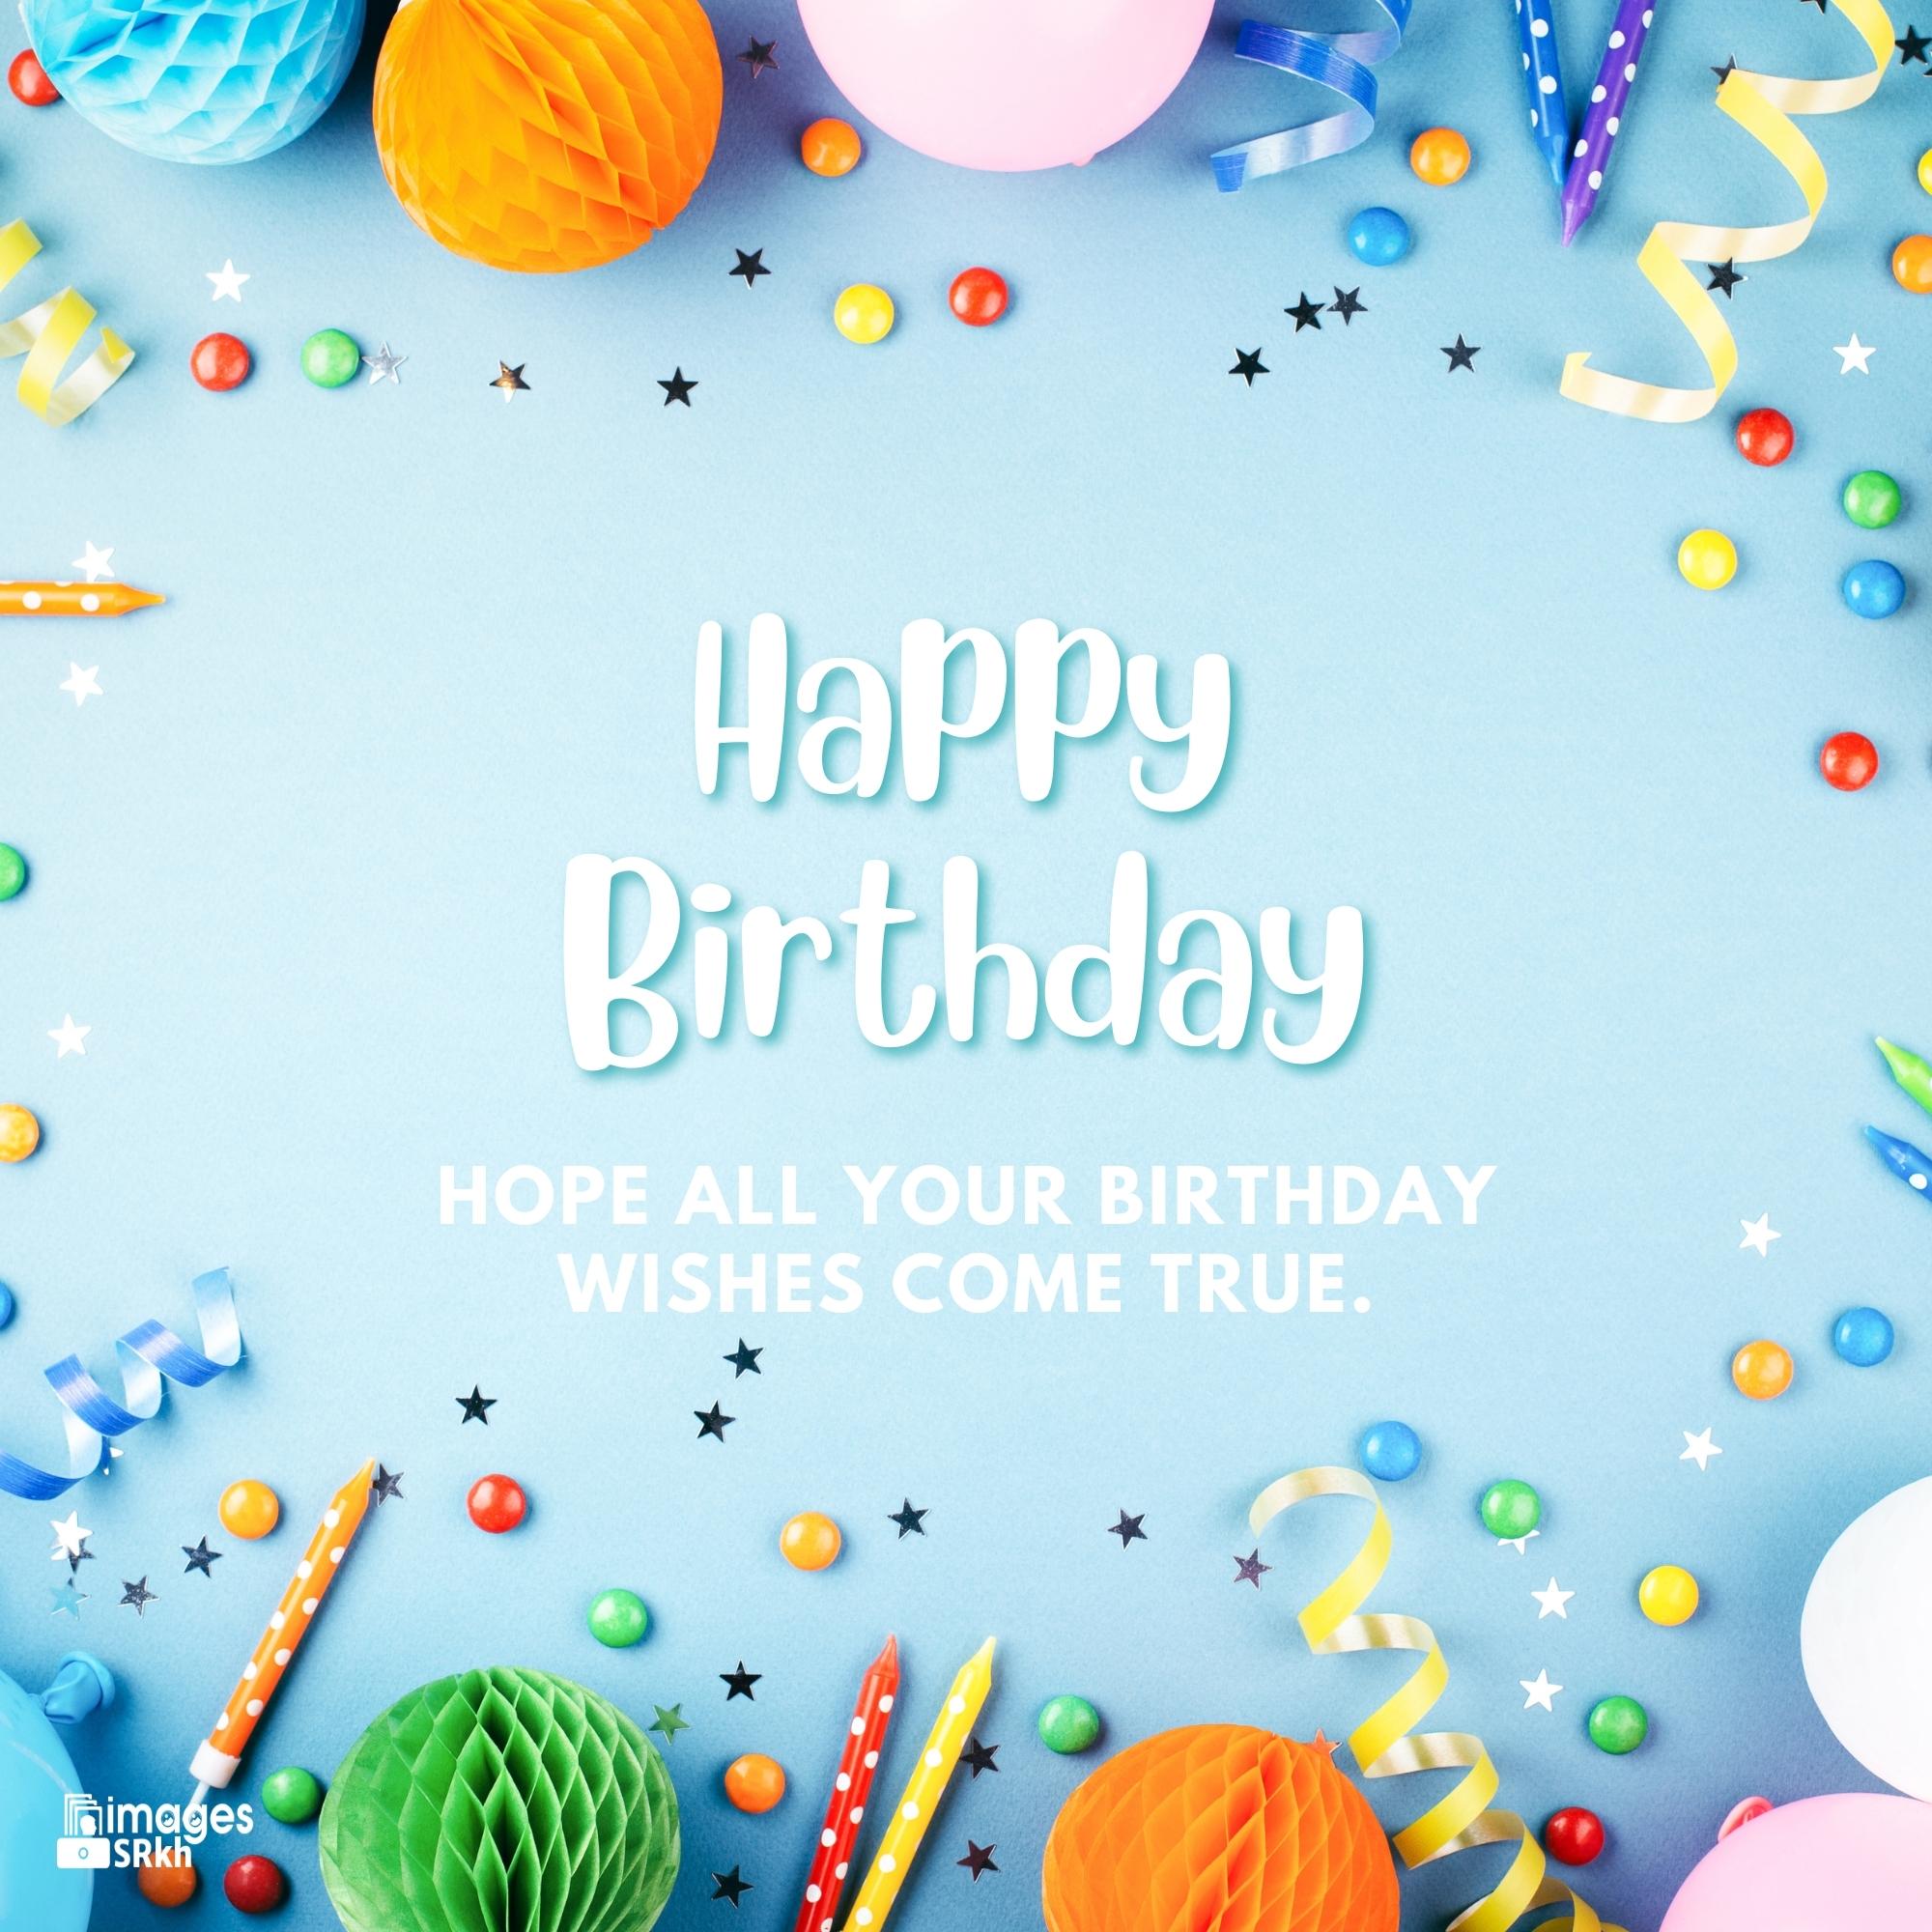 Happy Birthday Images & Quotes hd